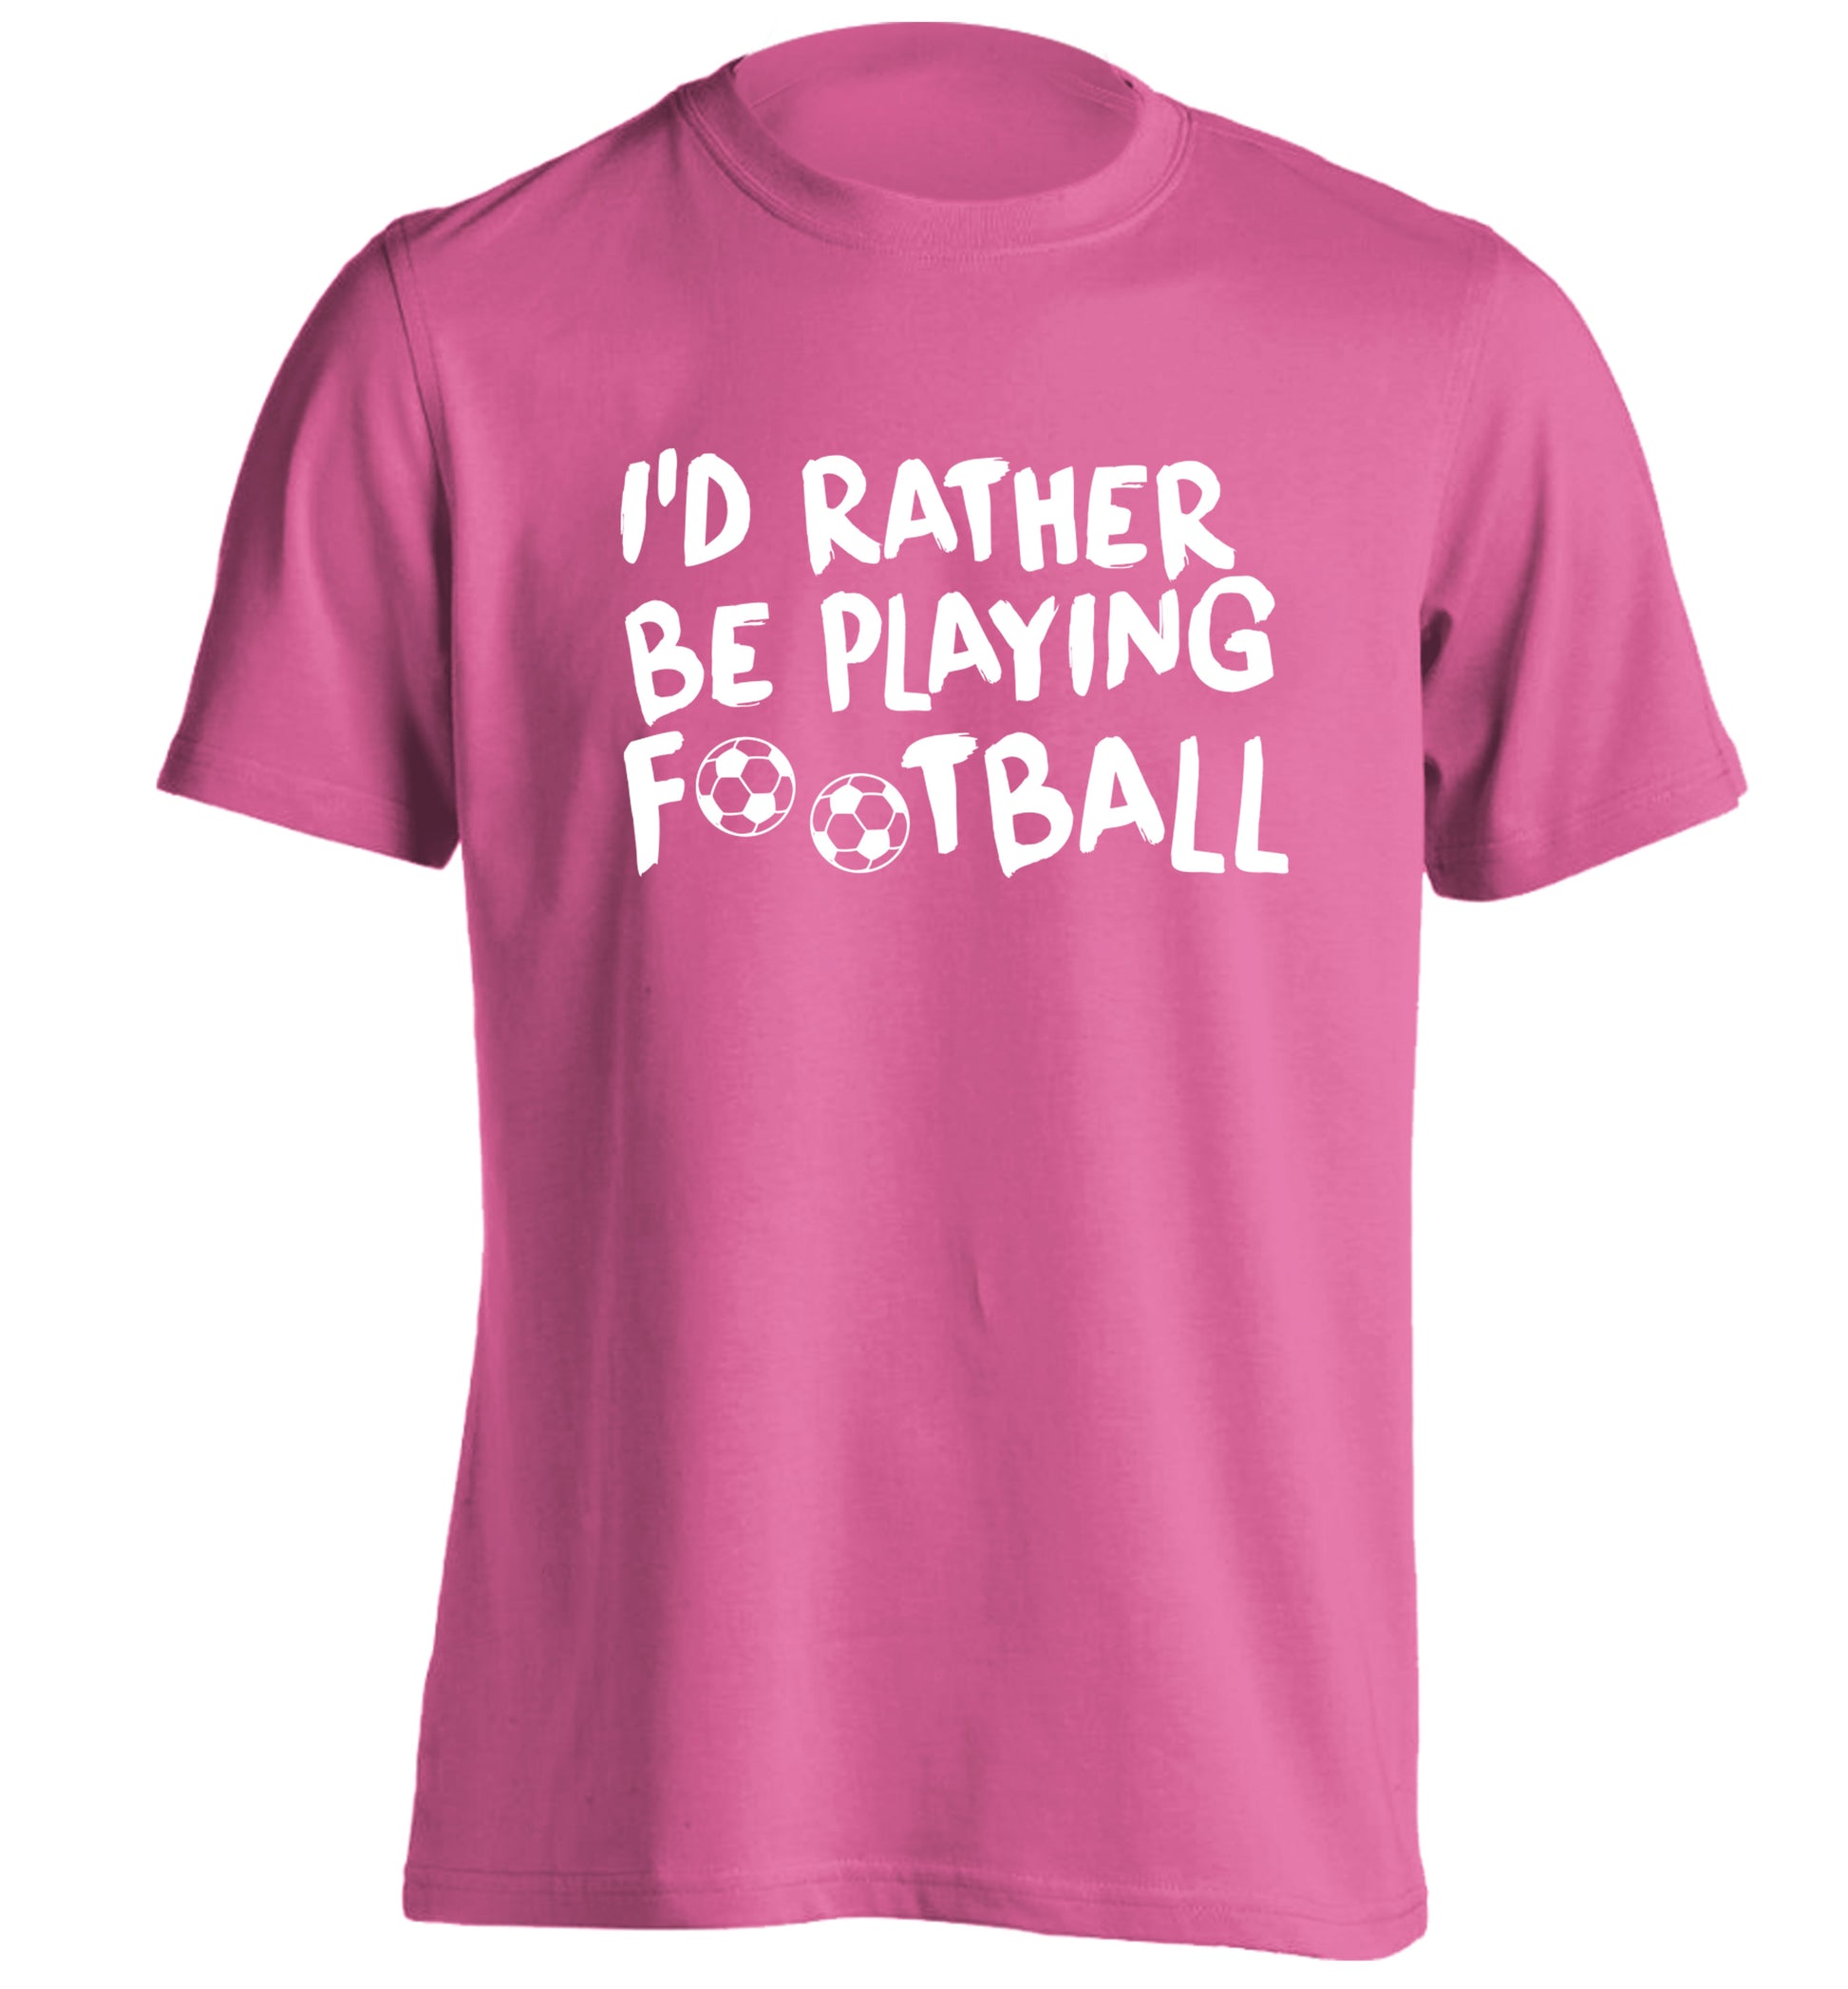 I'd rather be playing football adults unisexpink Tshirt 2XL